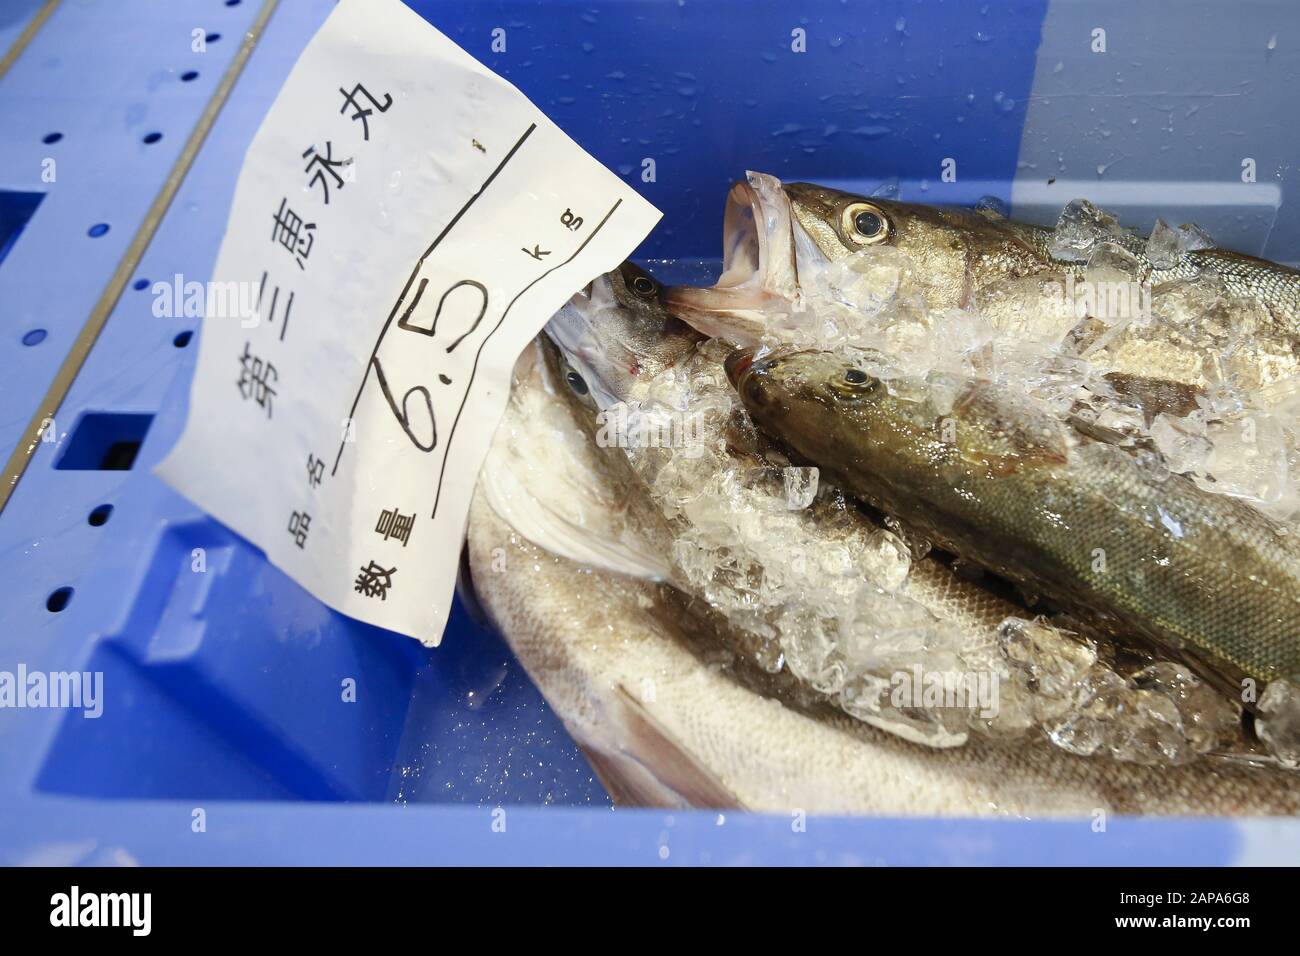 January 22 2020 Iwaki Japan Fishes For Sale Are Seen At The